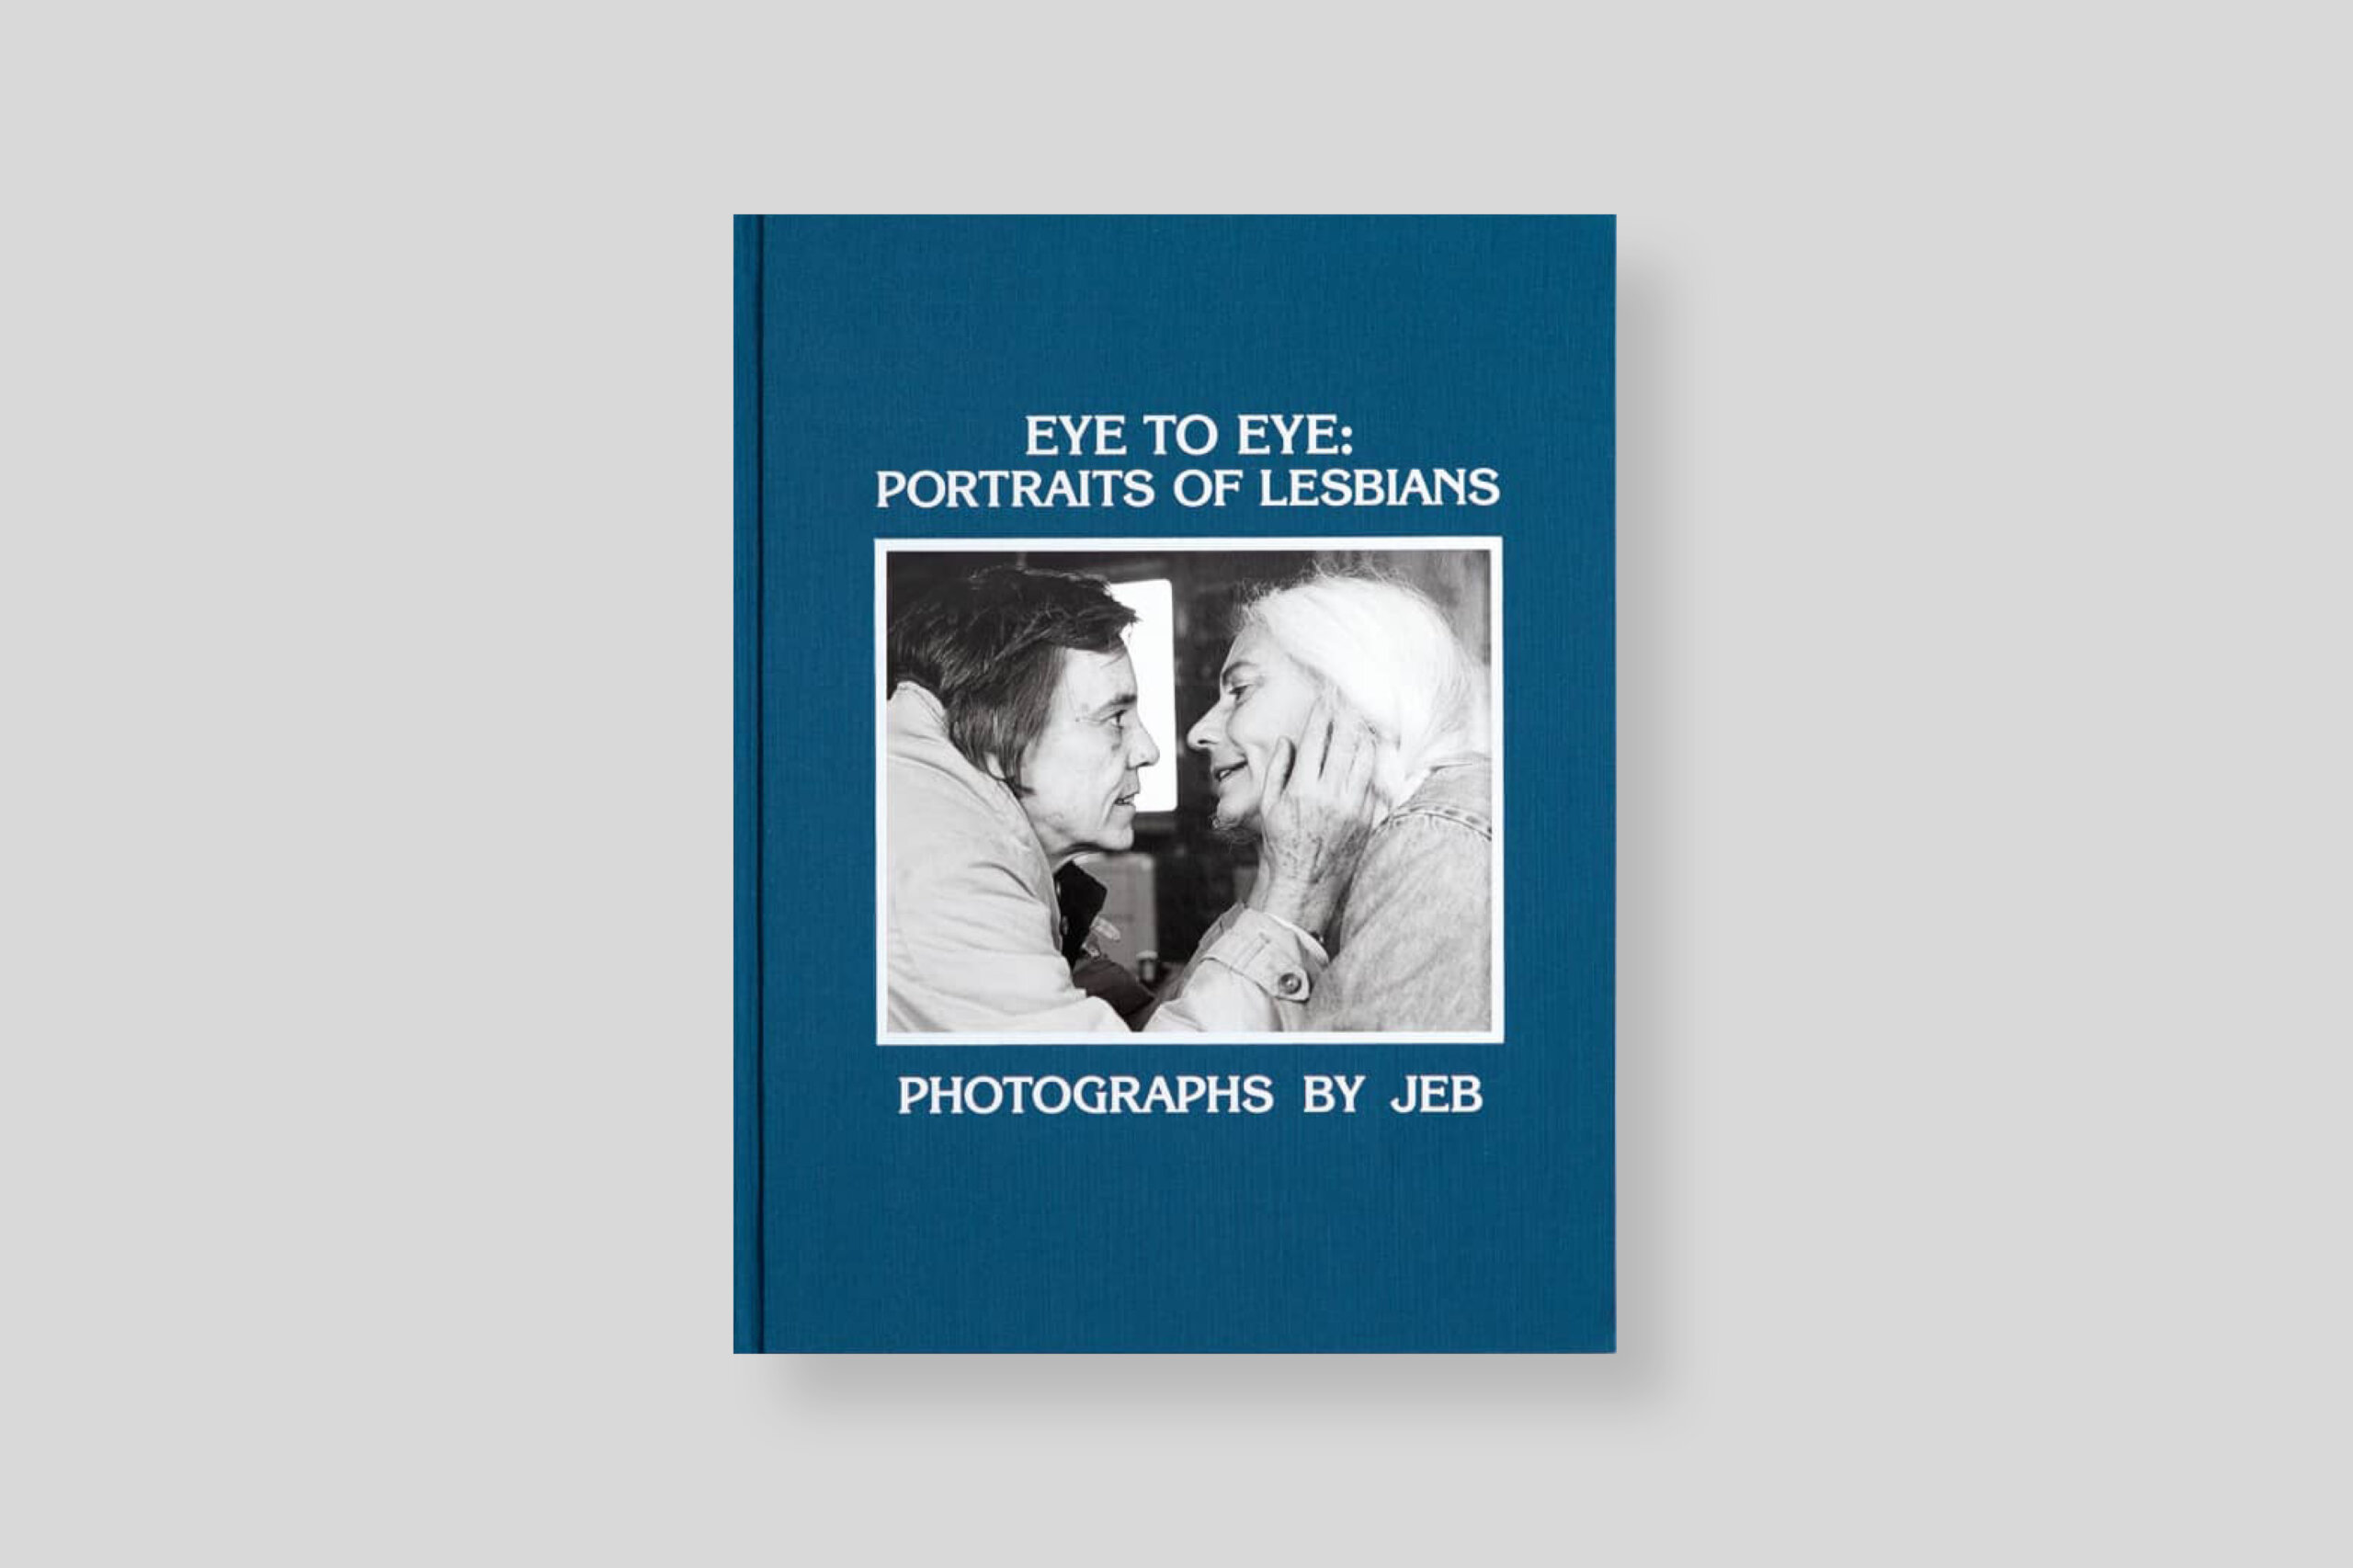 eye-to-eye-portraits-of-lesbians-photographs-by-jebs-biren-antology-editions-cover